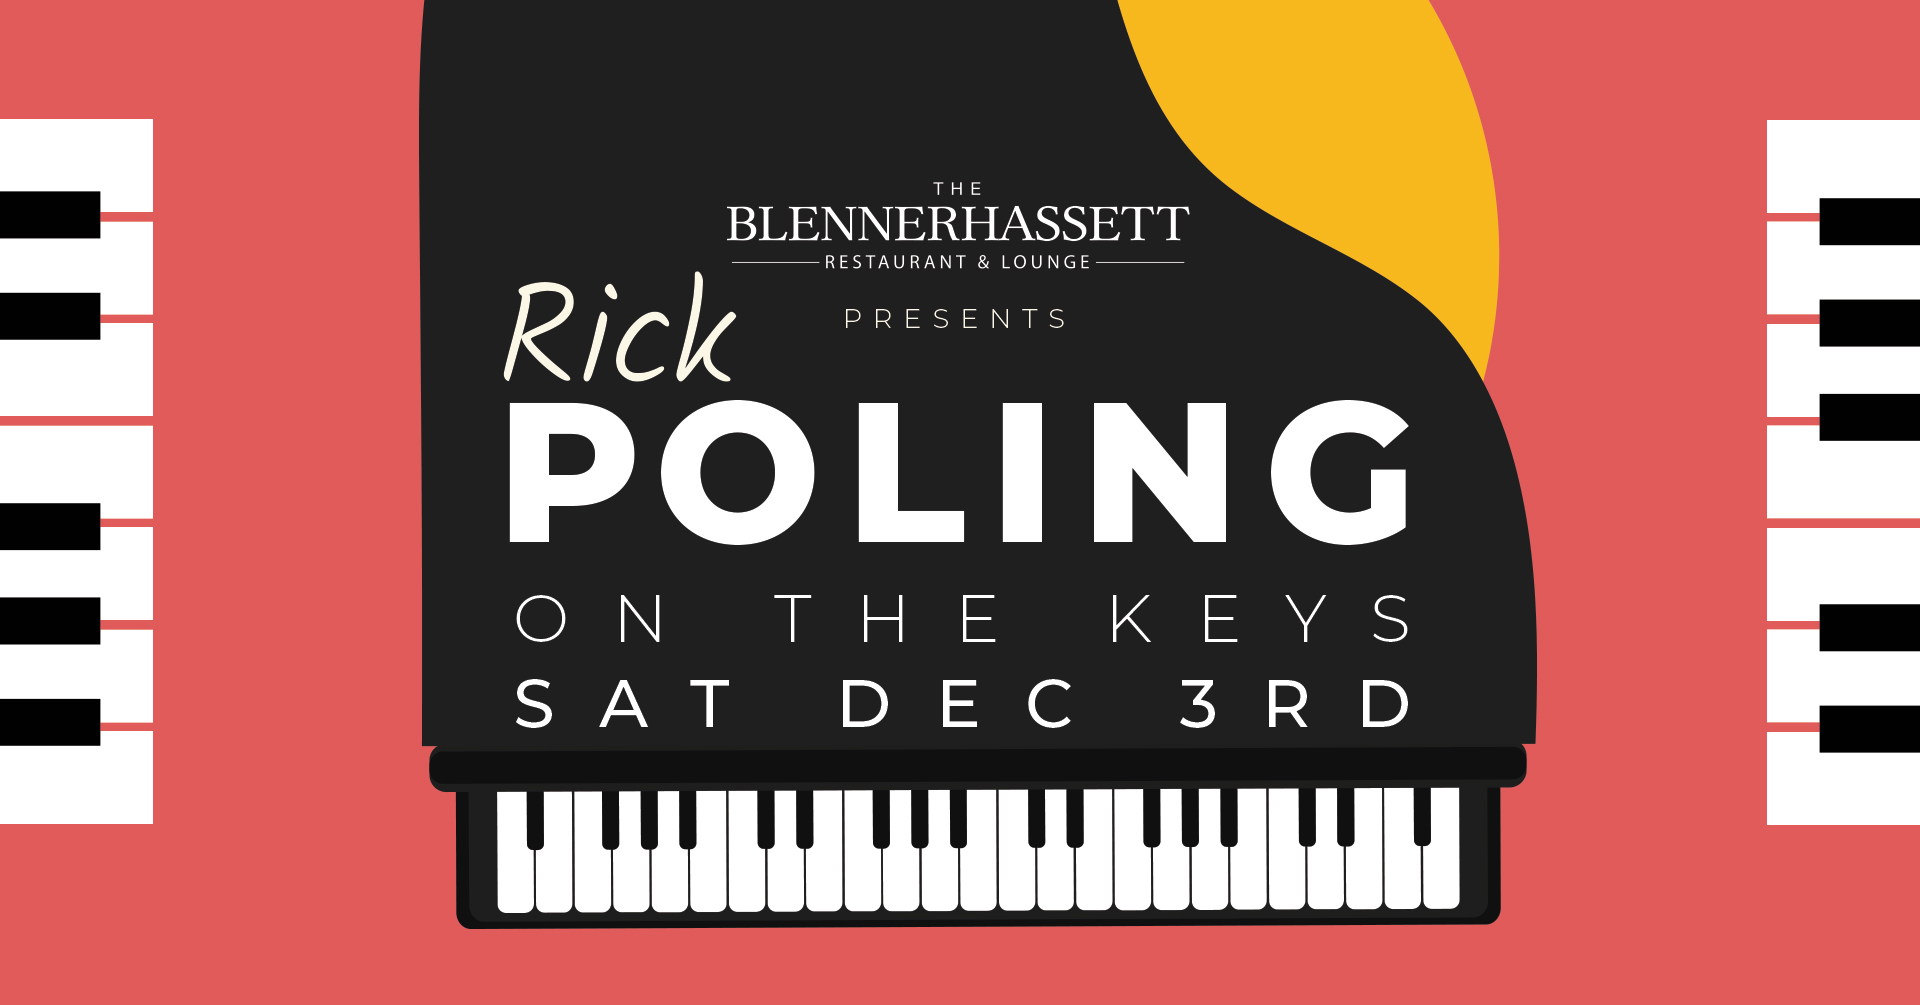 Rick Poling Plays at The Blennerhassett Restaurant and Lounge on Saturday, December 3rd